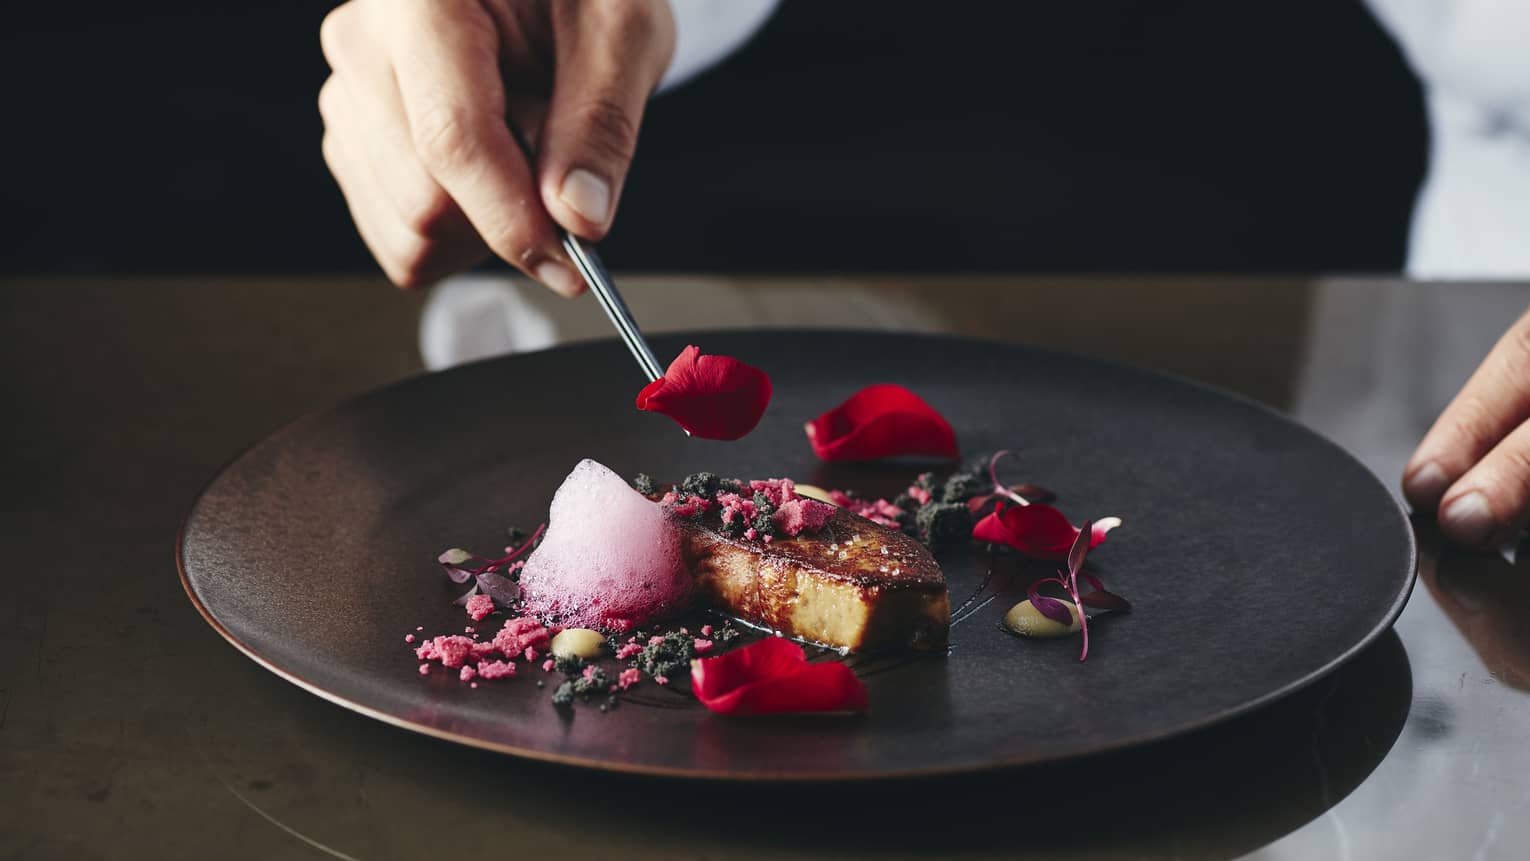 Chef places rose petal on small gourmet dessert